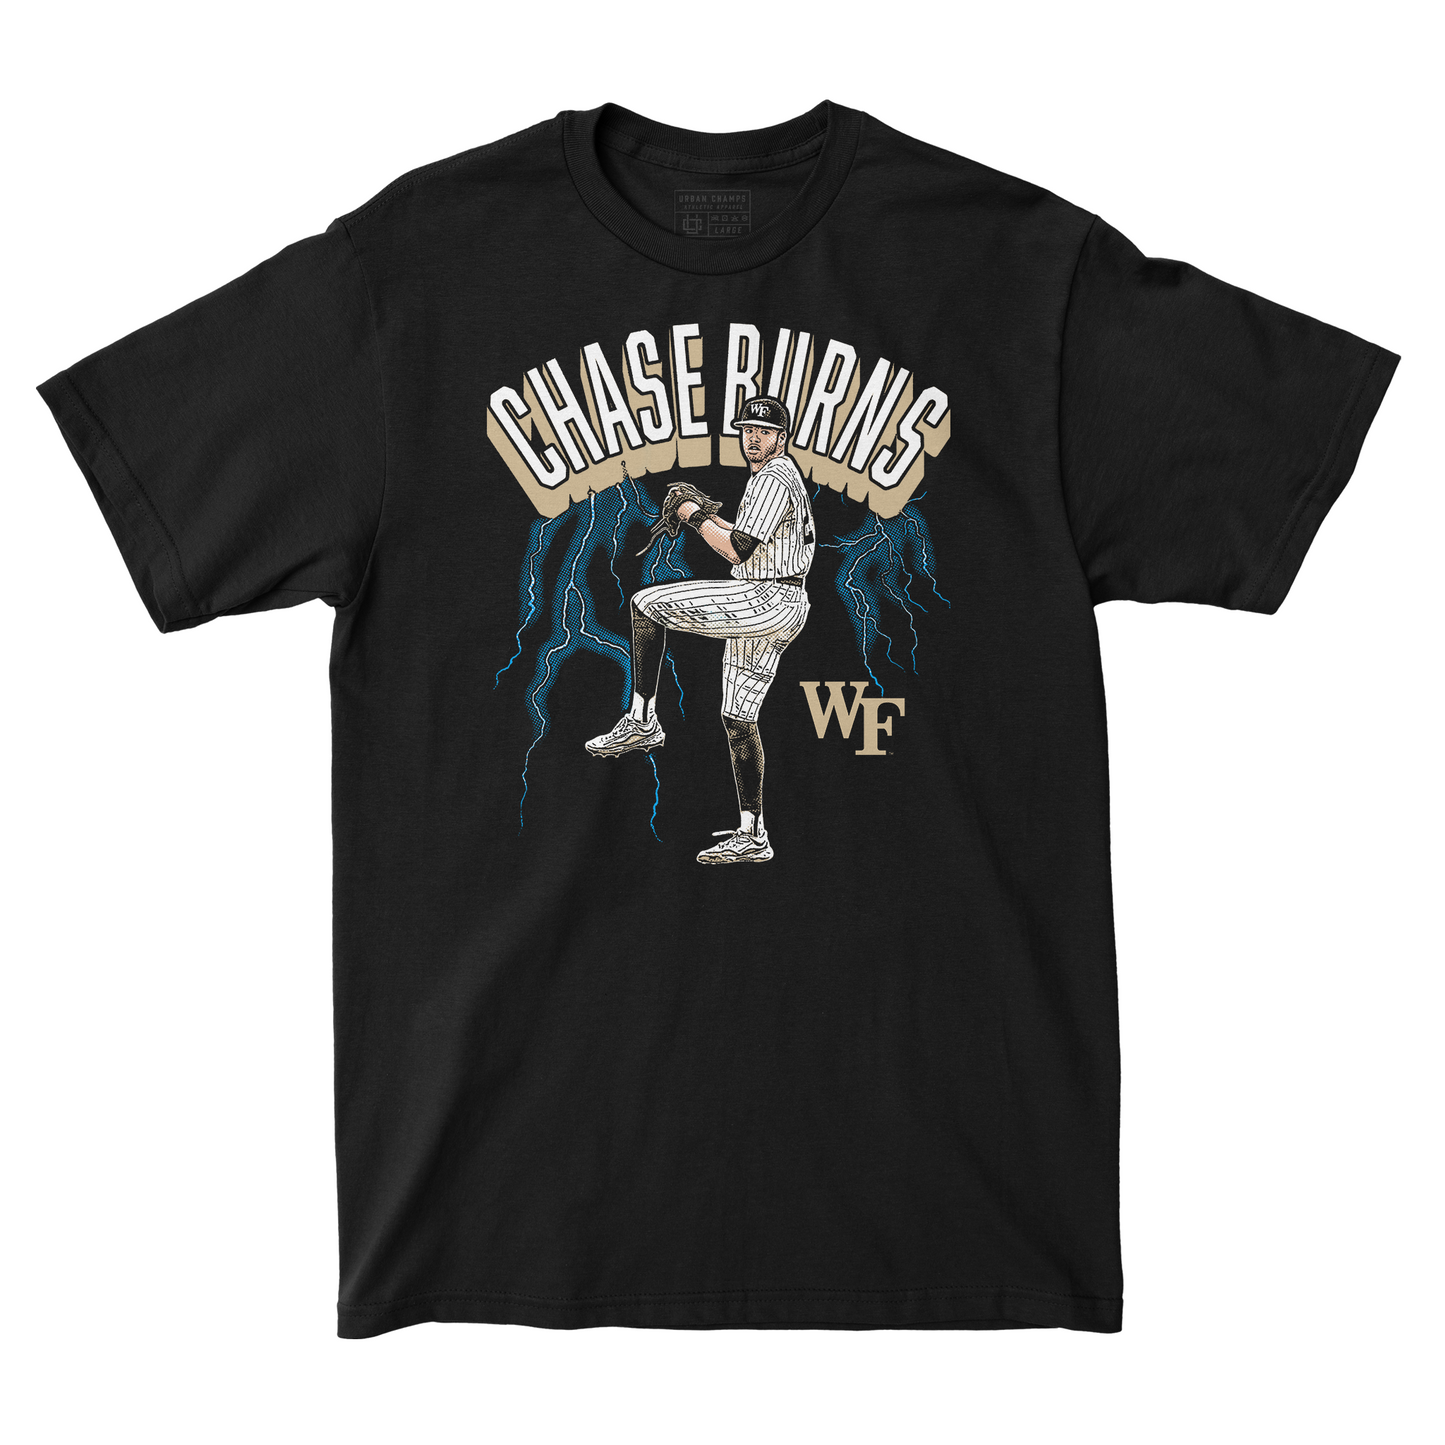 EXCLUSIVE RELEASE: Chase Burns - Lightning Tee